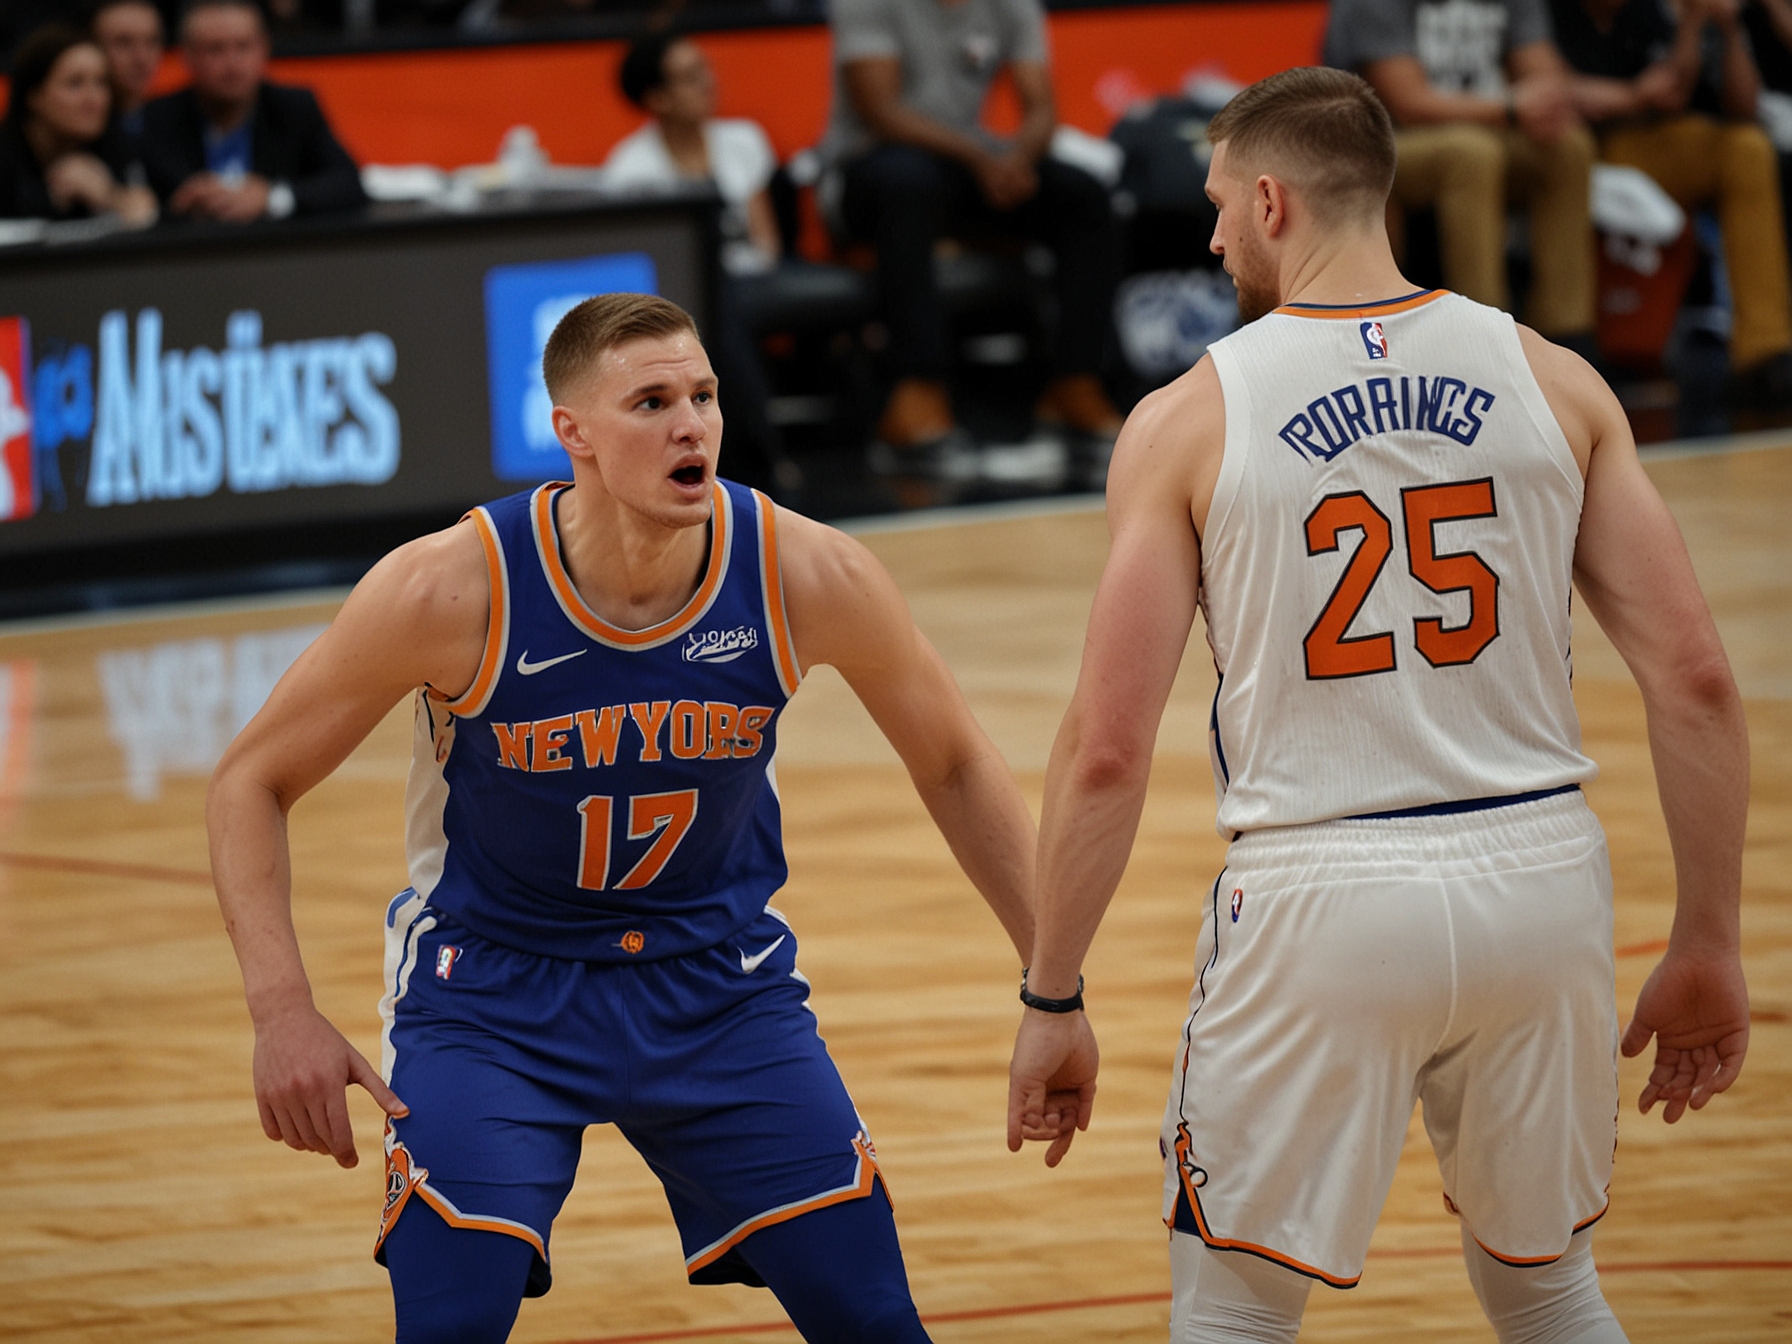 An intense moment in Game 5 of the NBA Finals as Kristaps Porzingis is tossed to the ground during a heated exchange under the basket, drawing attention to the physical play.